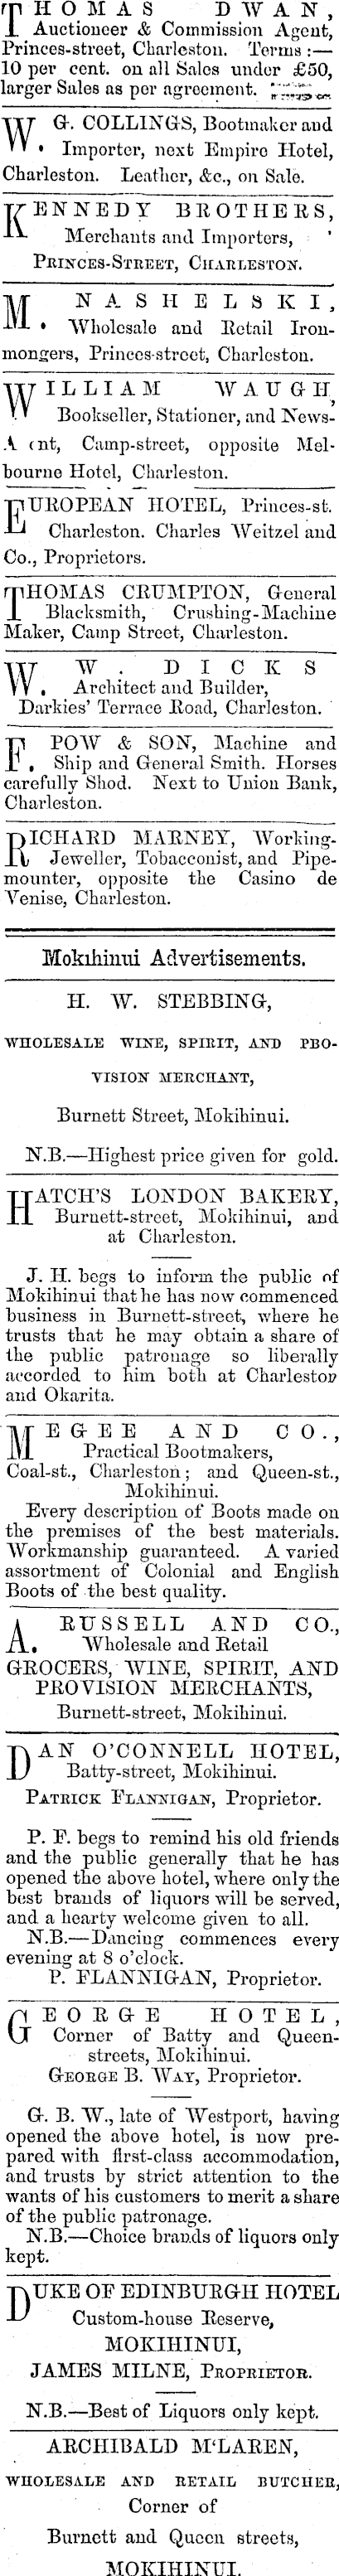 Papers Past Newspapers Westport Times 15 February 1868 Page 4 Advertisements Column 3